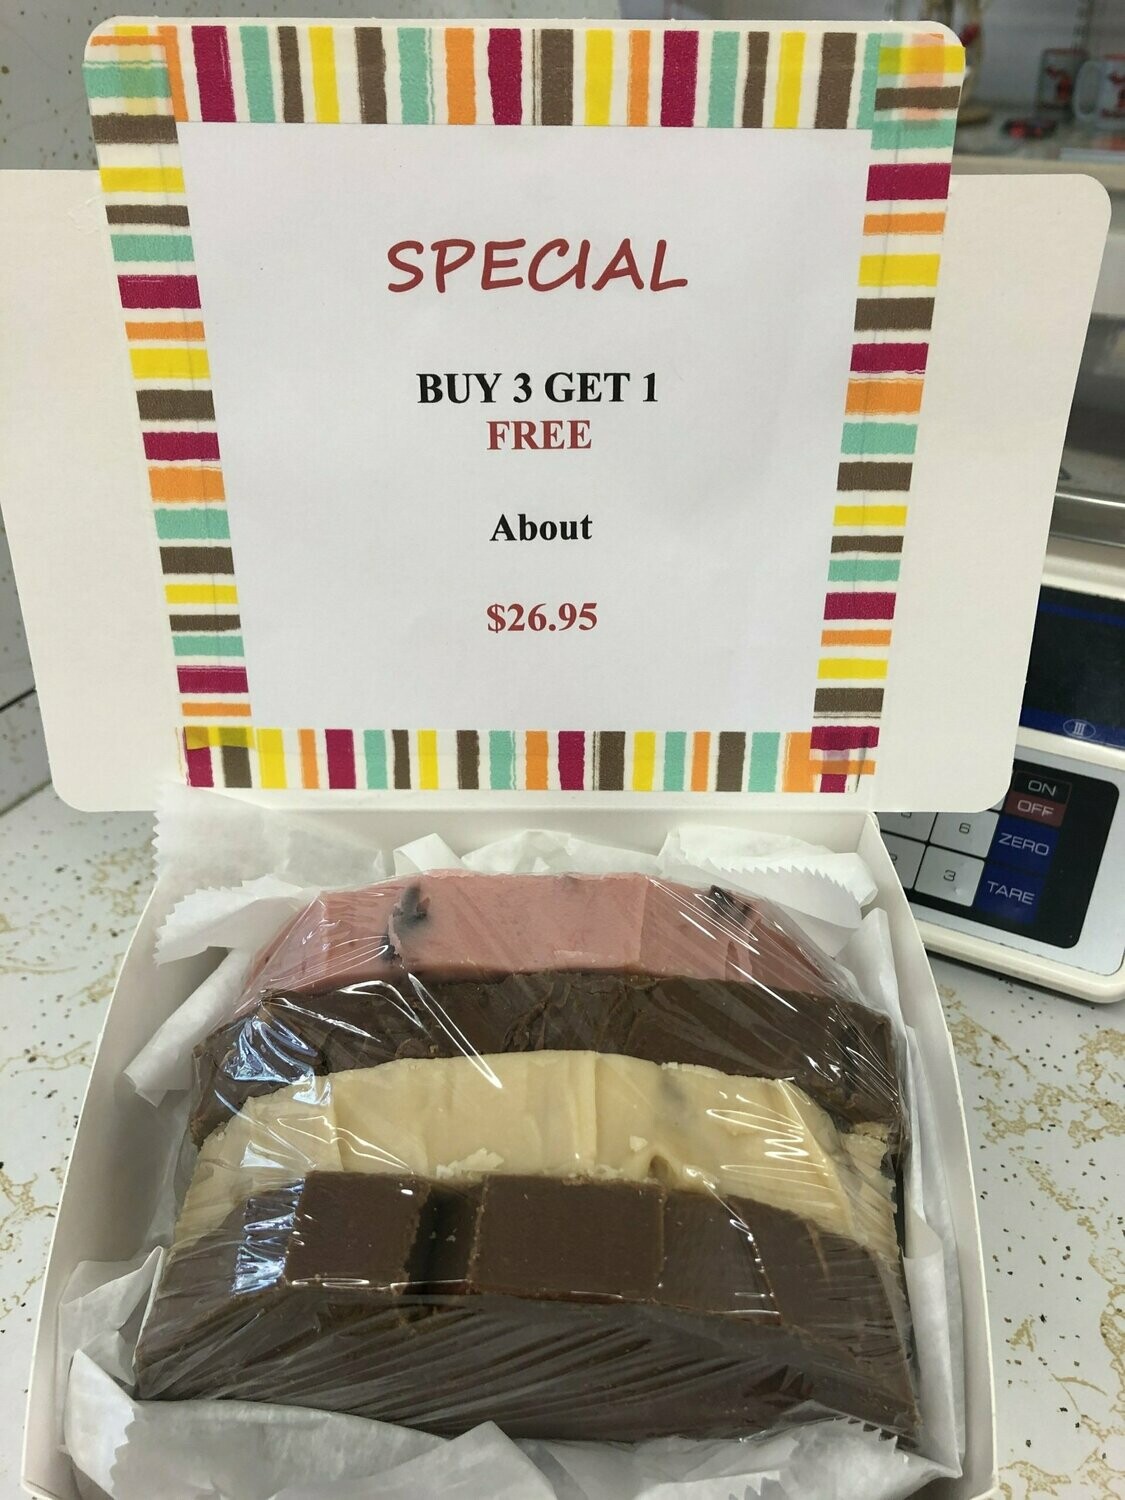 Special Buy 3 Get 1 FREE